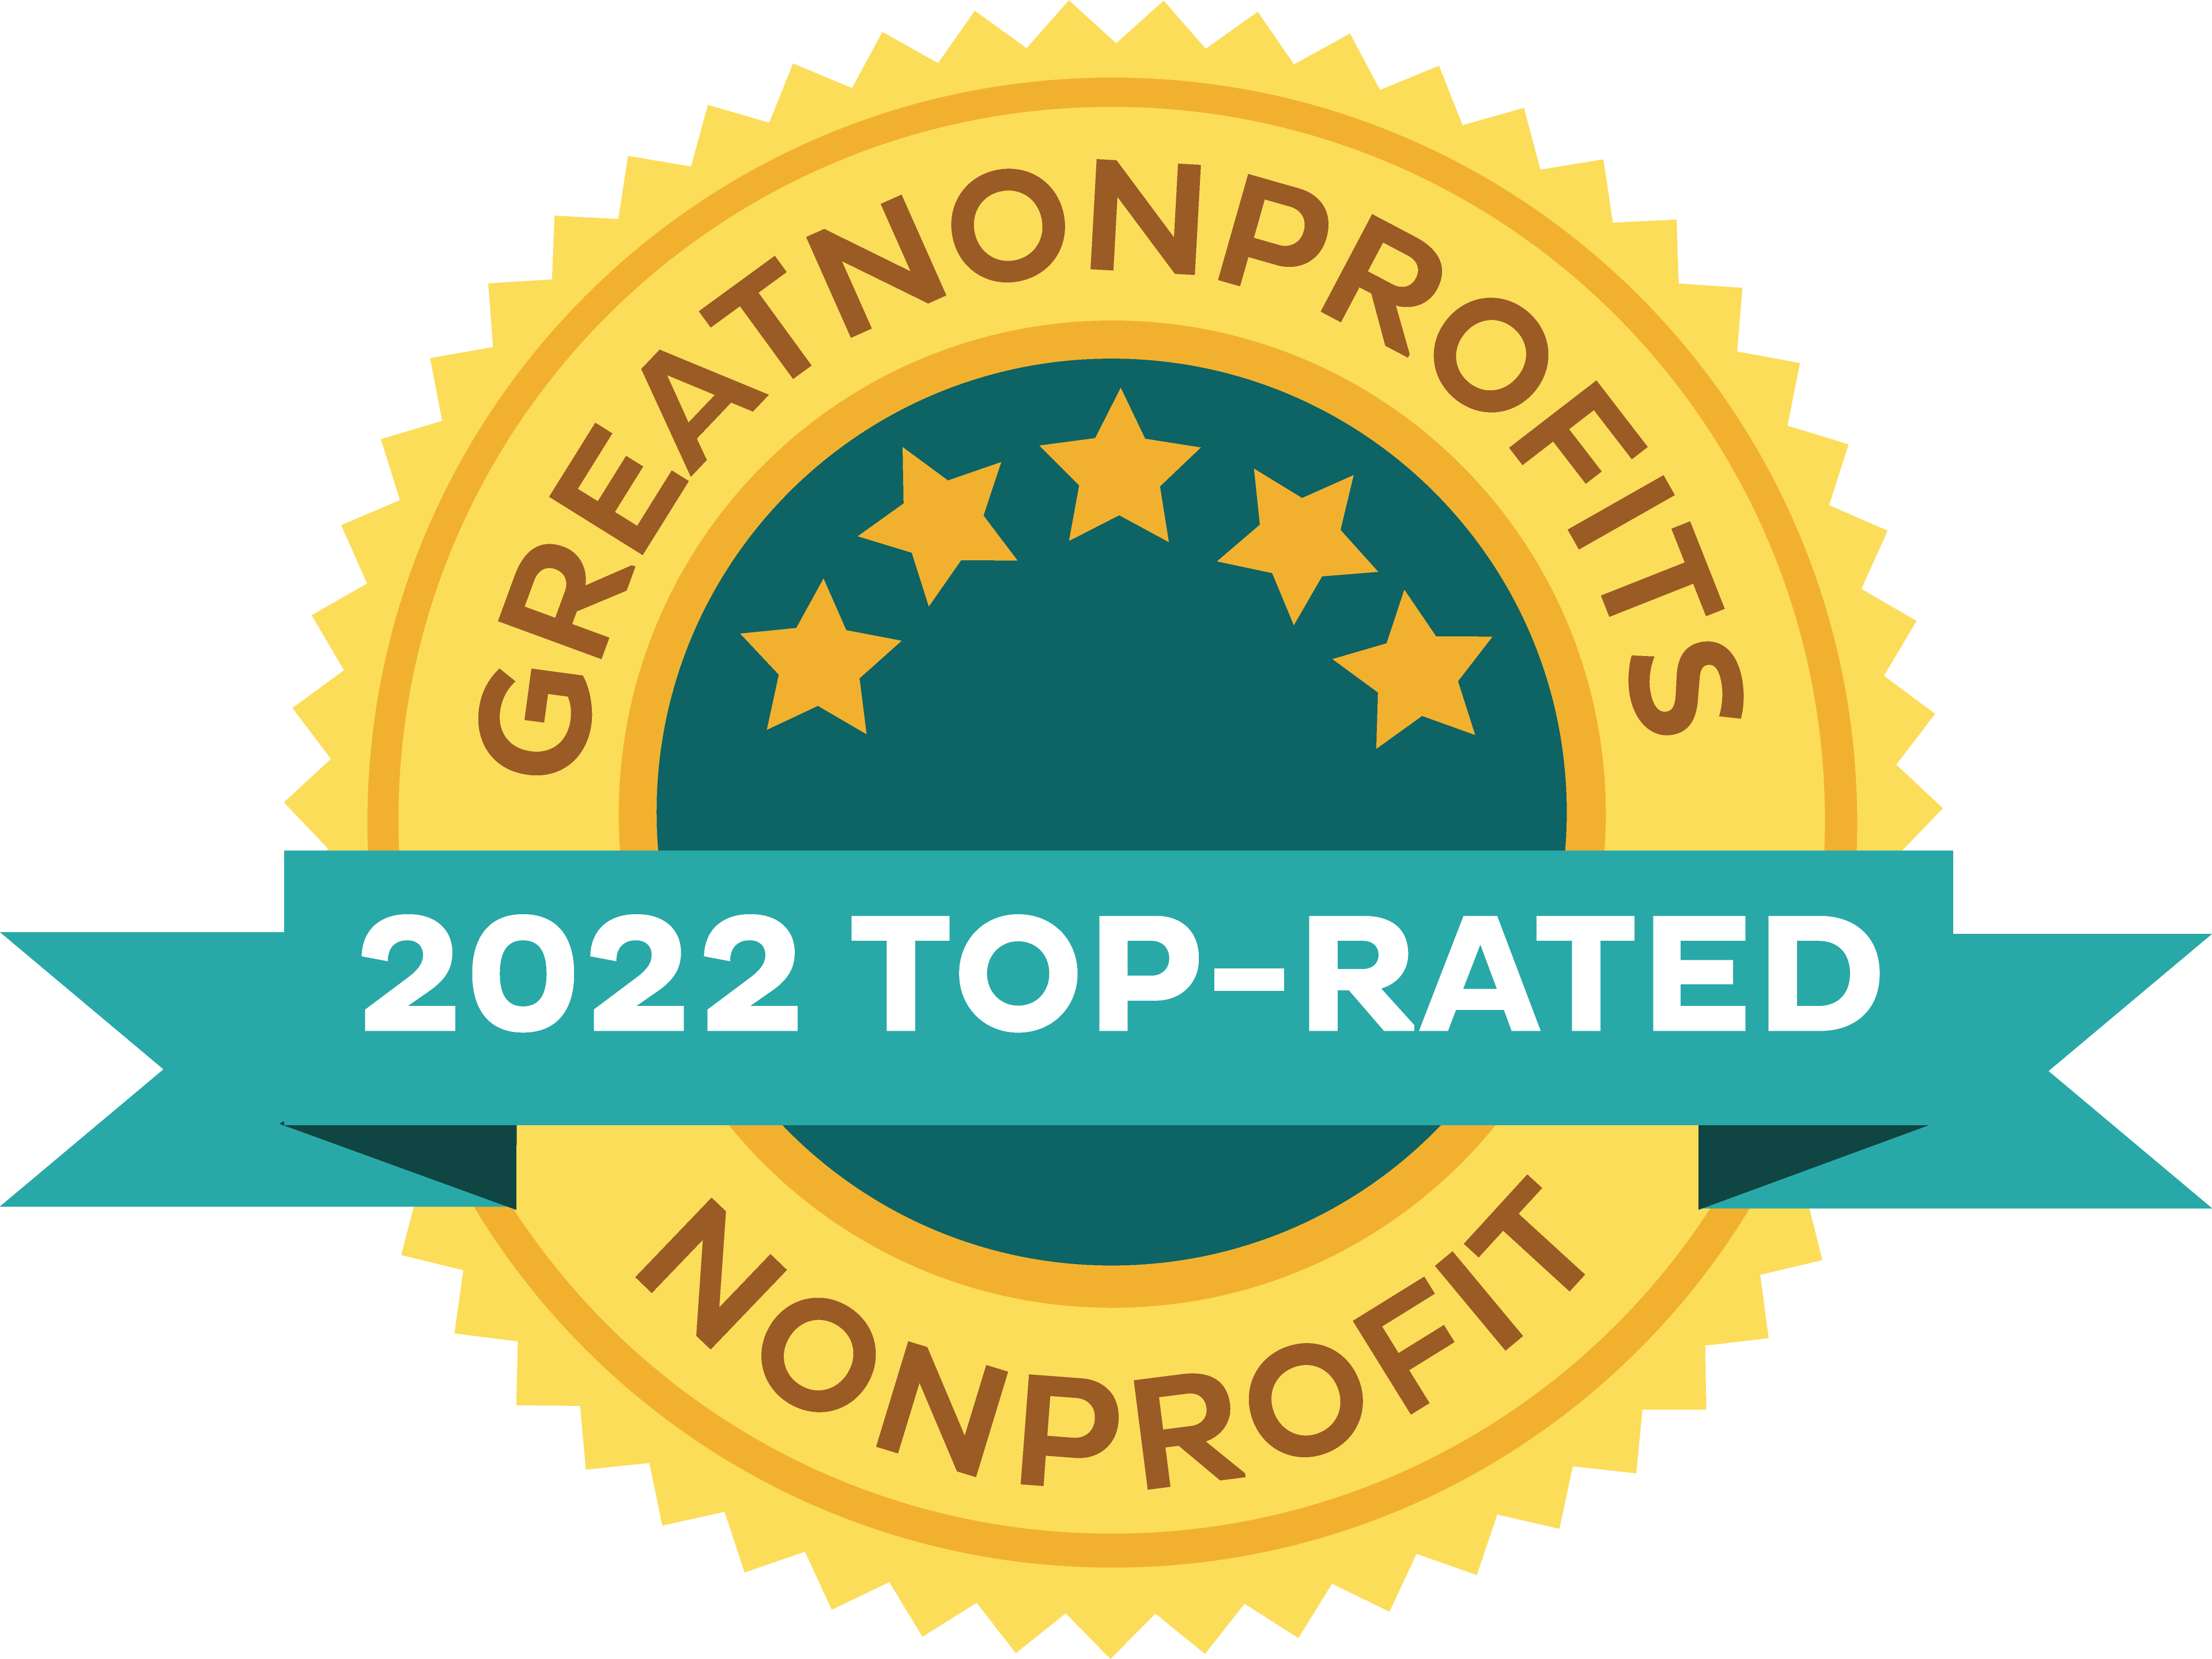 2022 Top-Rated Nonprofit badge